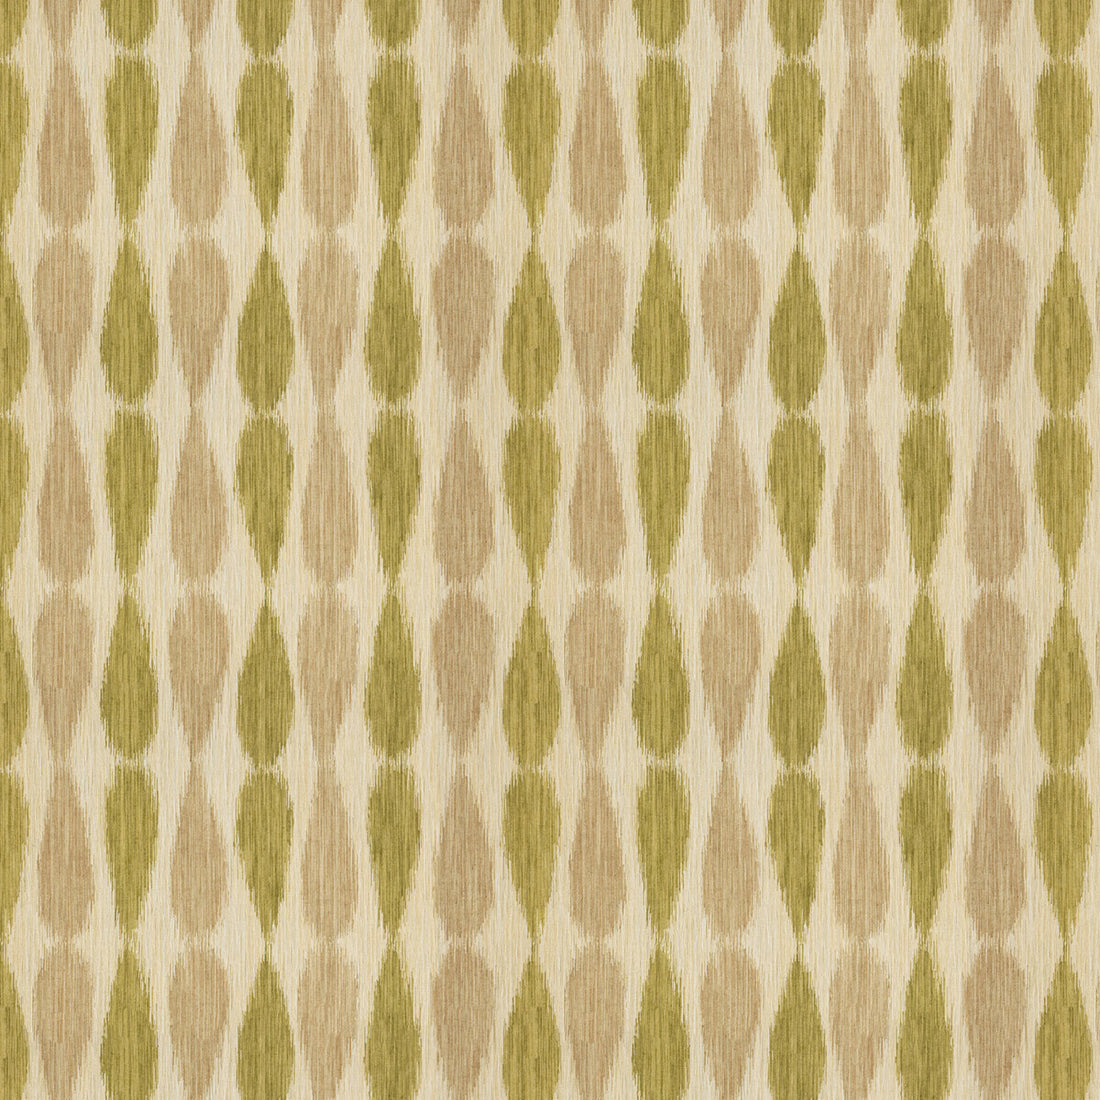 Ikat Drops fabric in lime color - pattern GWF-2927.23.0 - by Lee Jofa Modern in the Allegra Hicks II collection